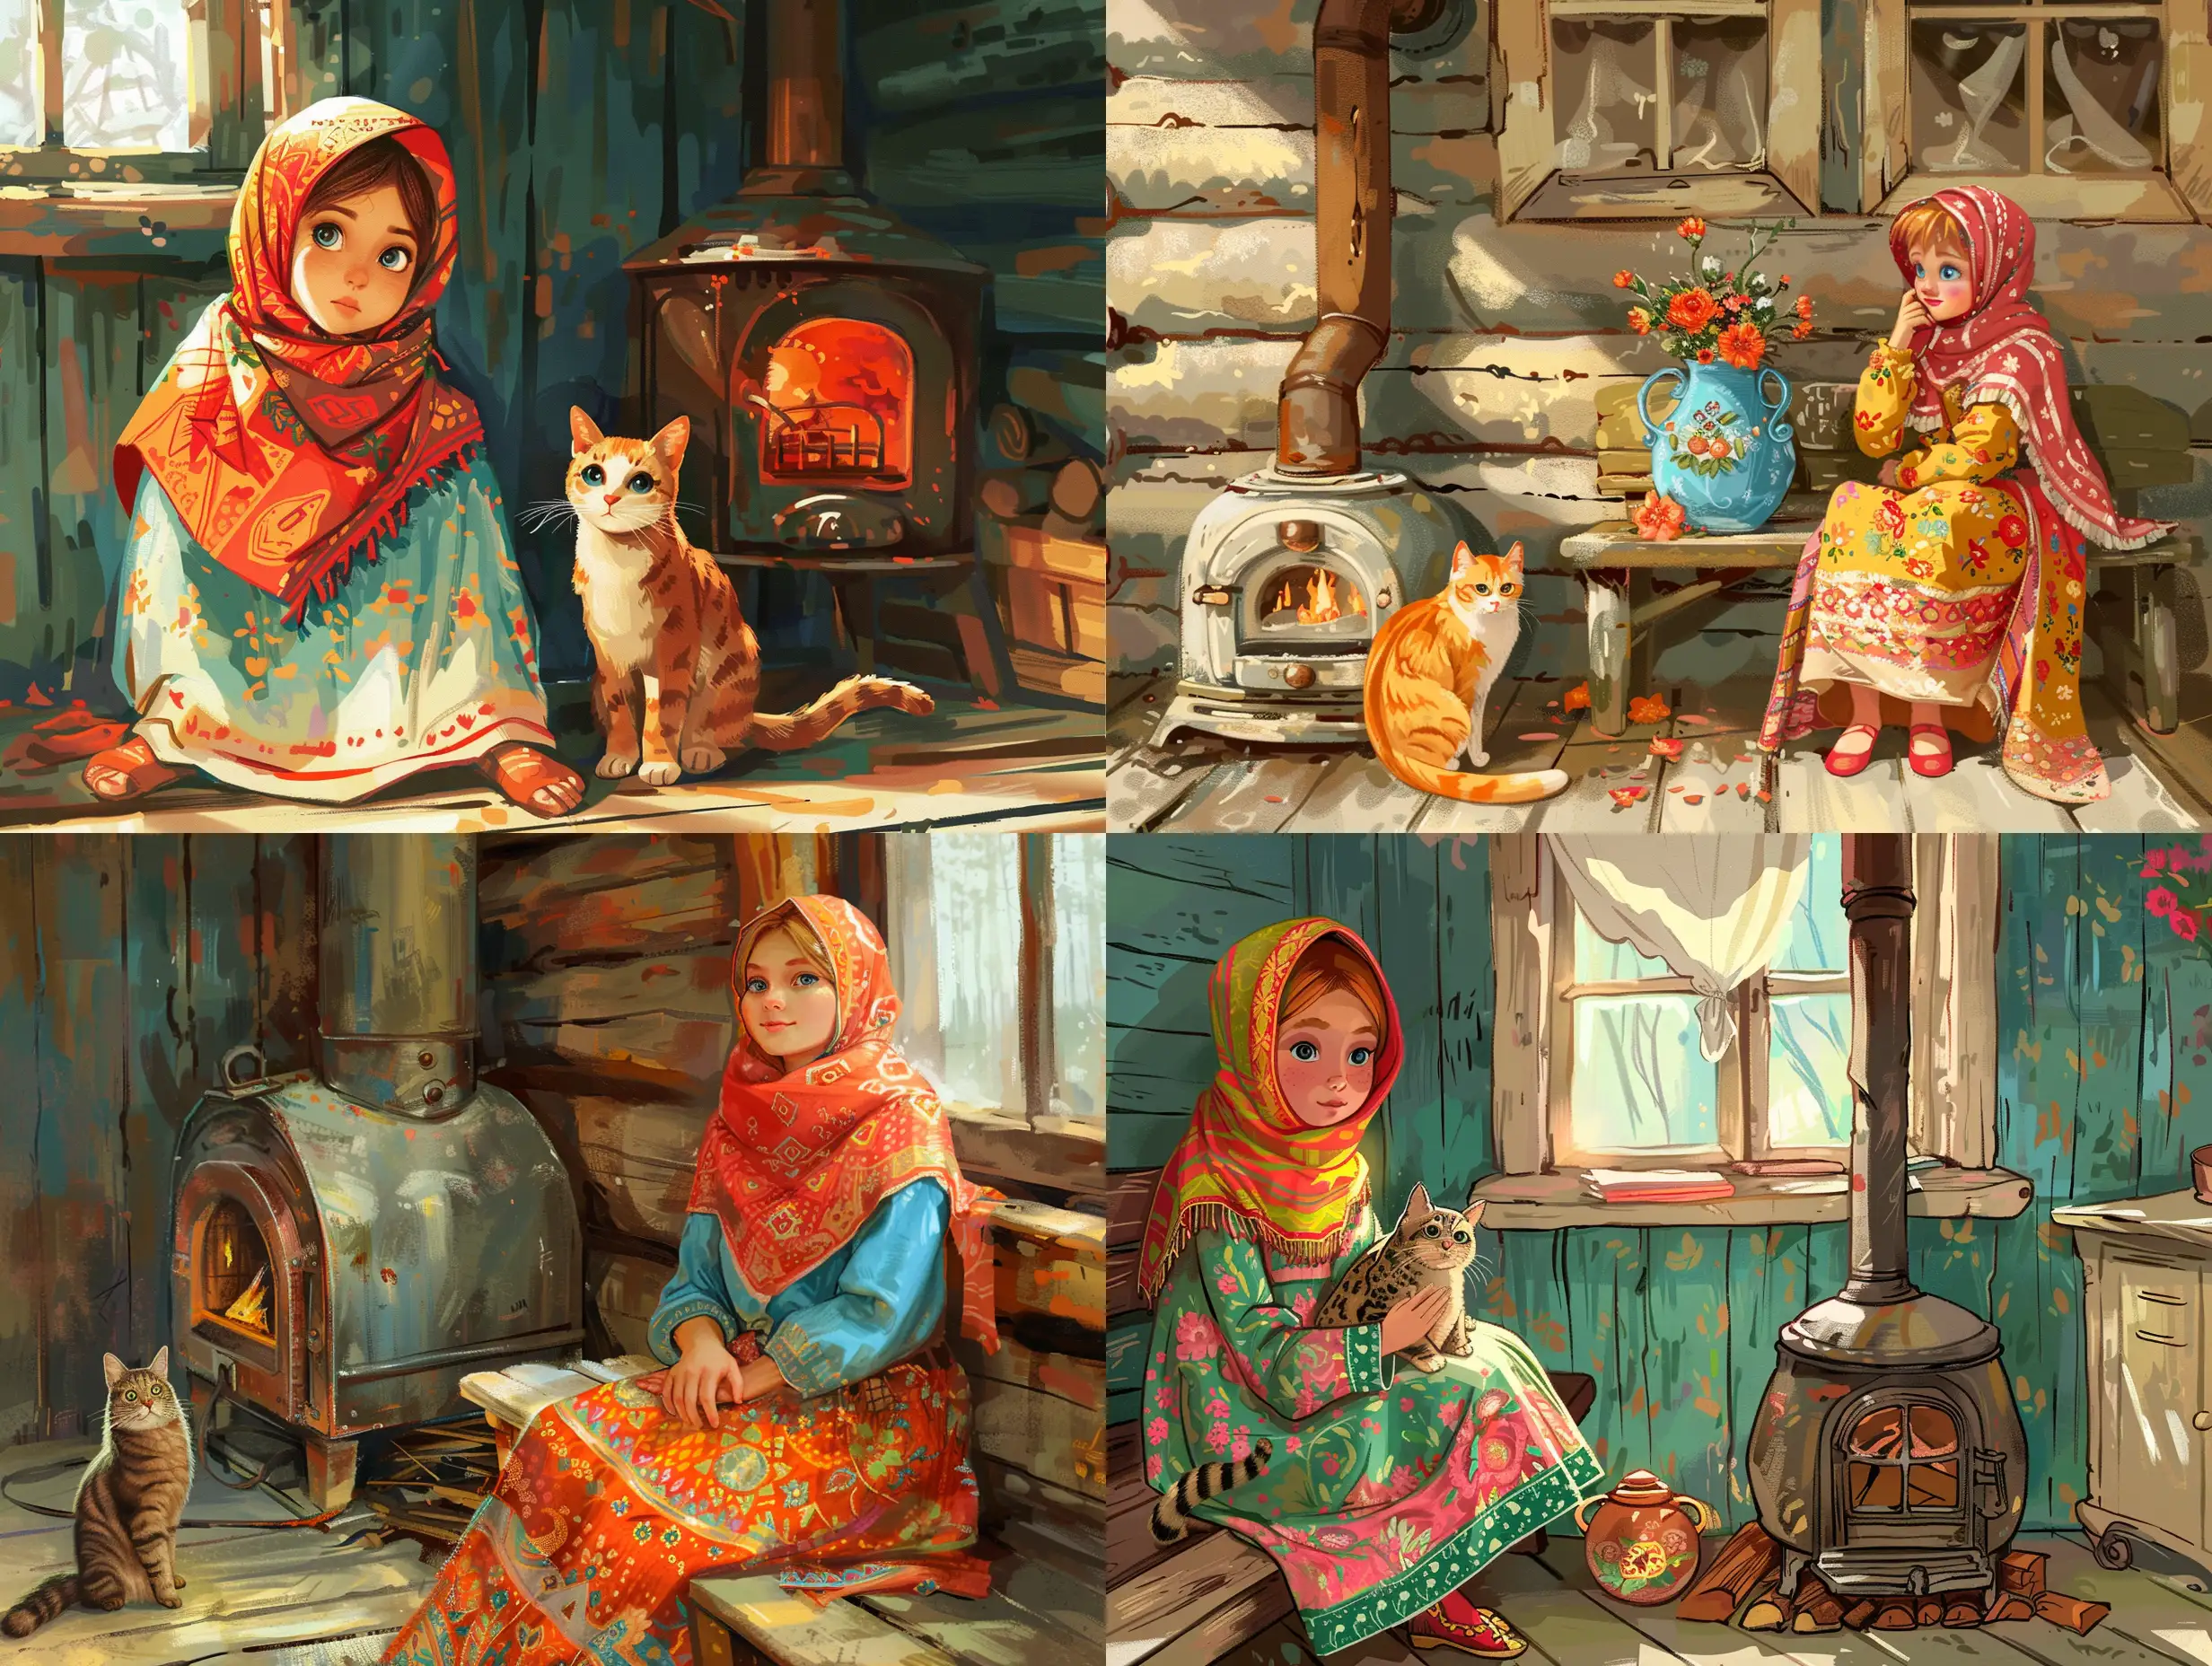 Illustration like a Disney fairytale about 7-years Russian girl with a headscarf and Russian sundress, she sits with a cat on the wood bench in an old Russian hut next to the traditional Russian stove